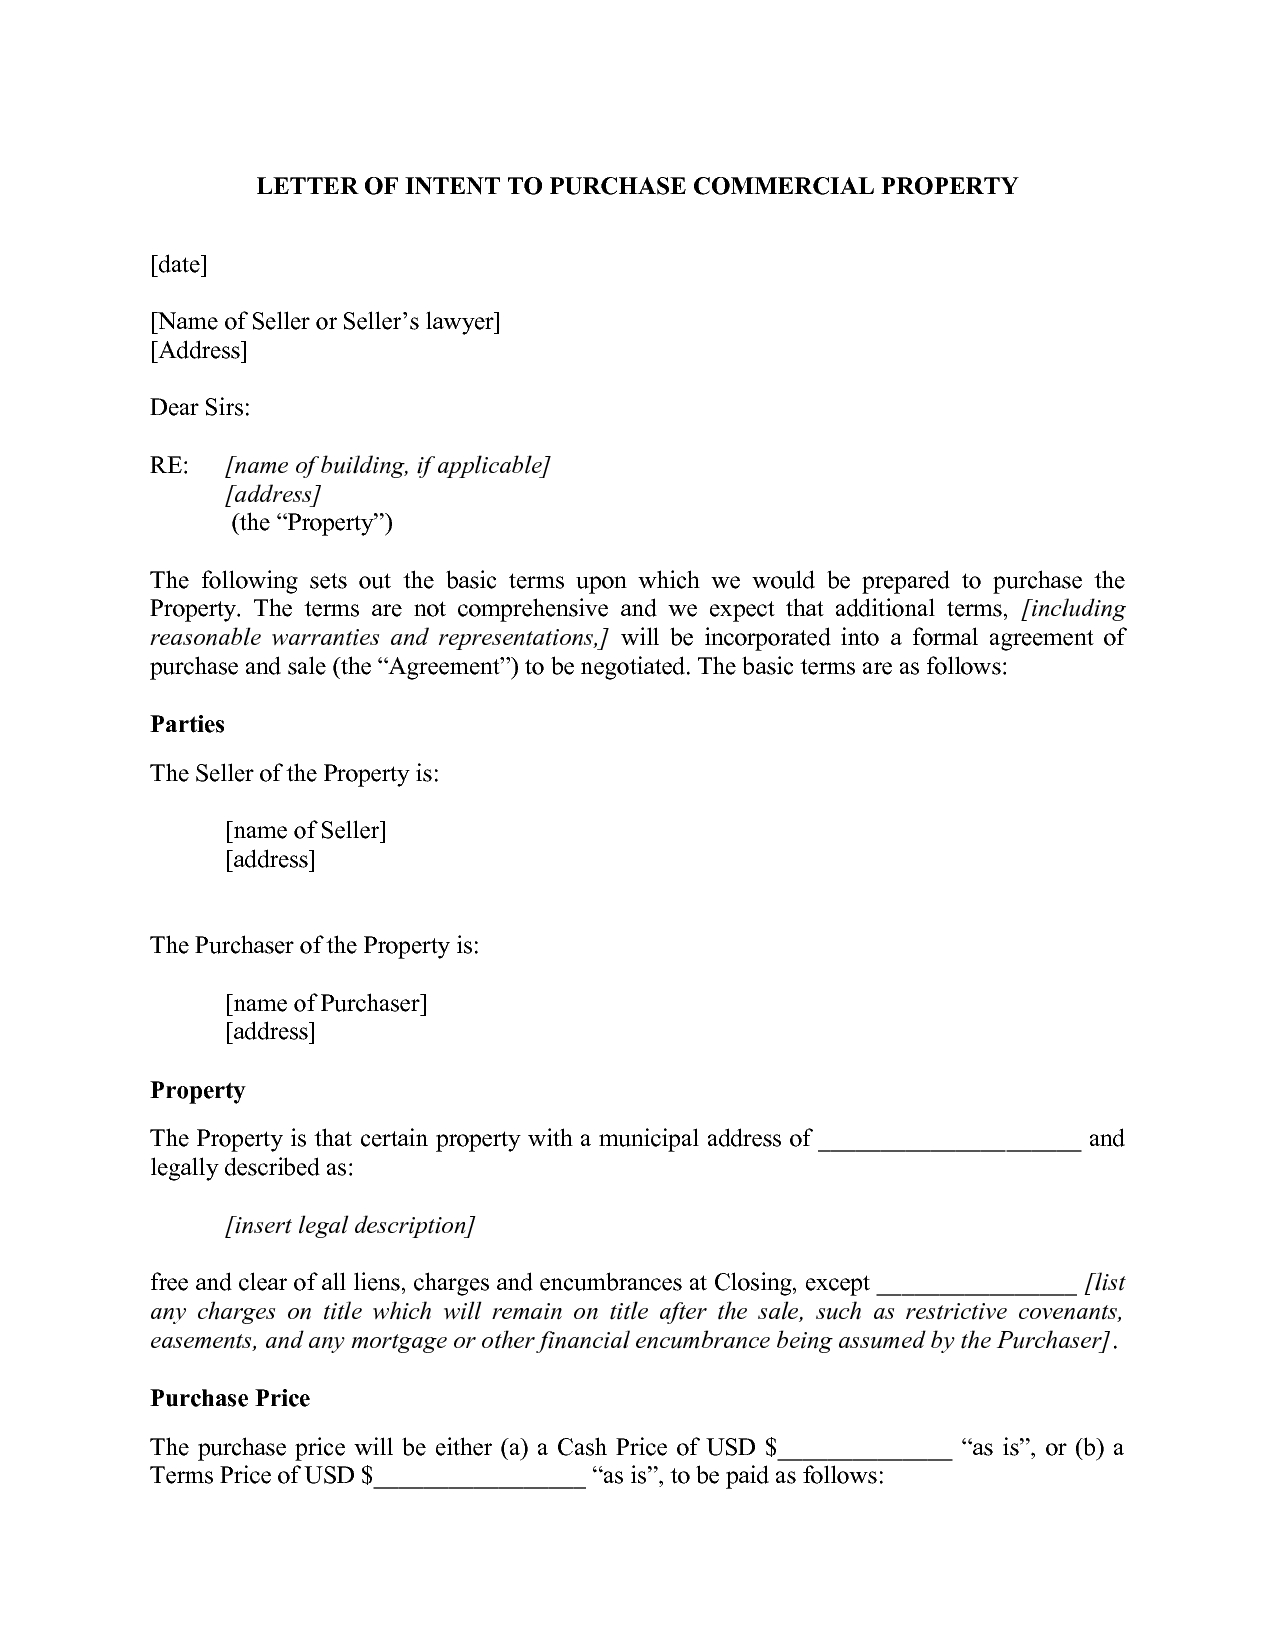 Commercial Real Estate Lease Letter Of Intent Template - Sample Letter Intent Jpeg to Lease Mercial Property Pdf In